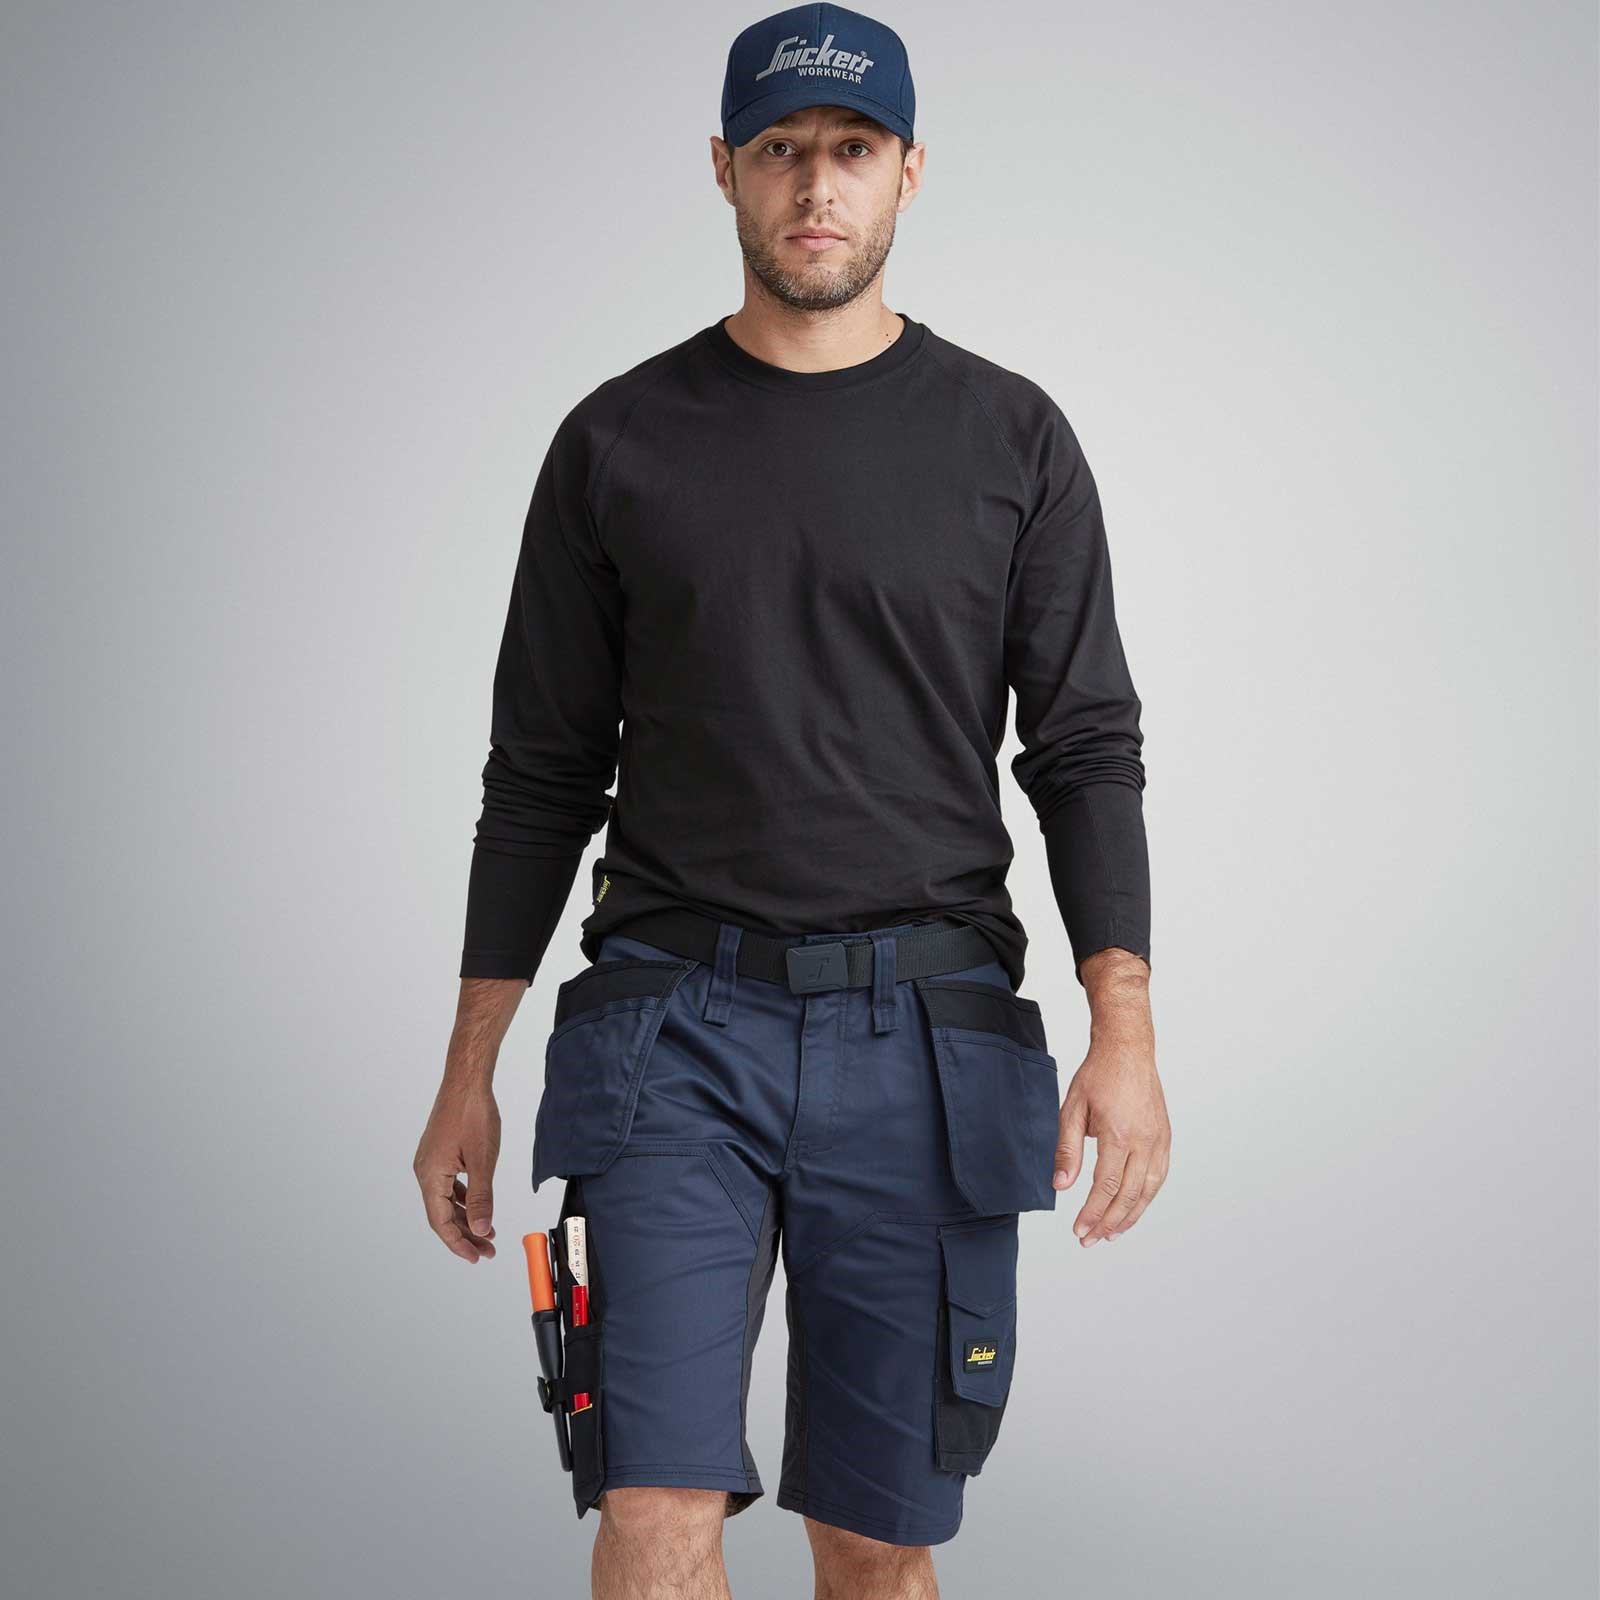 Men's Allroundwork Stretch Loose Fit Works with Holster Pockets